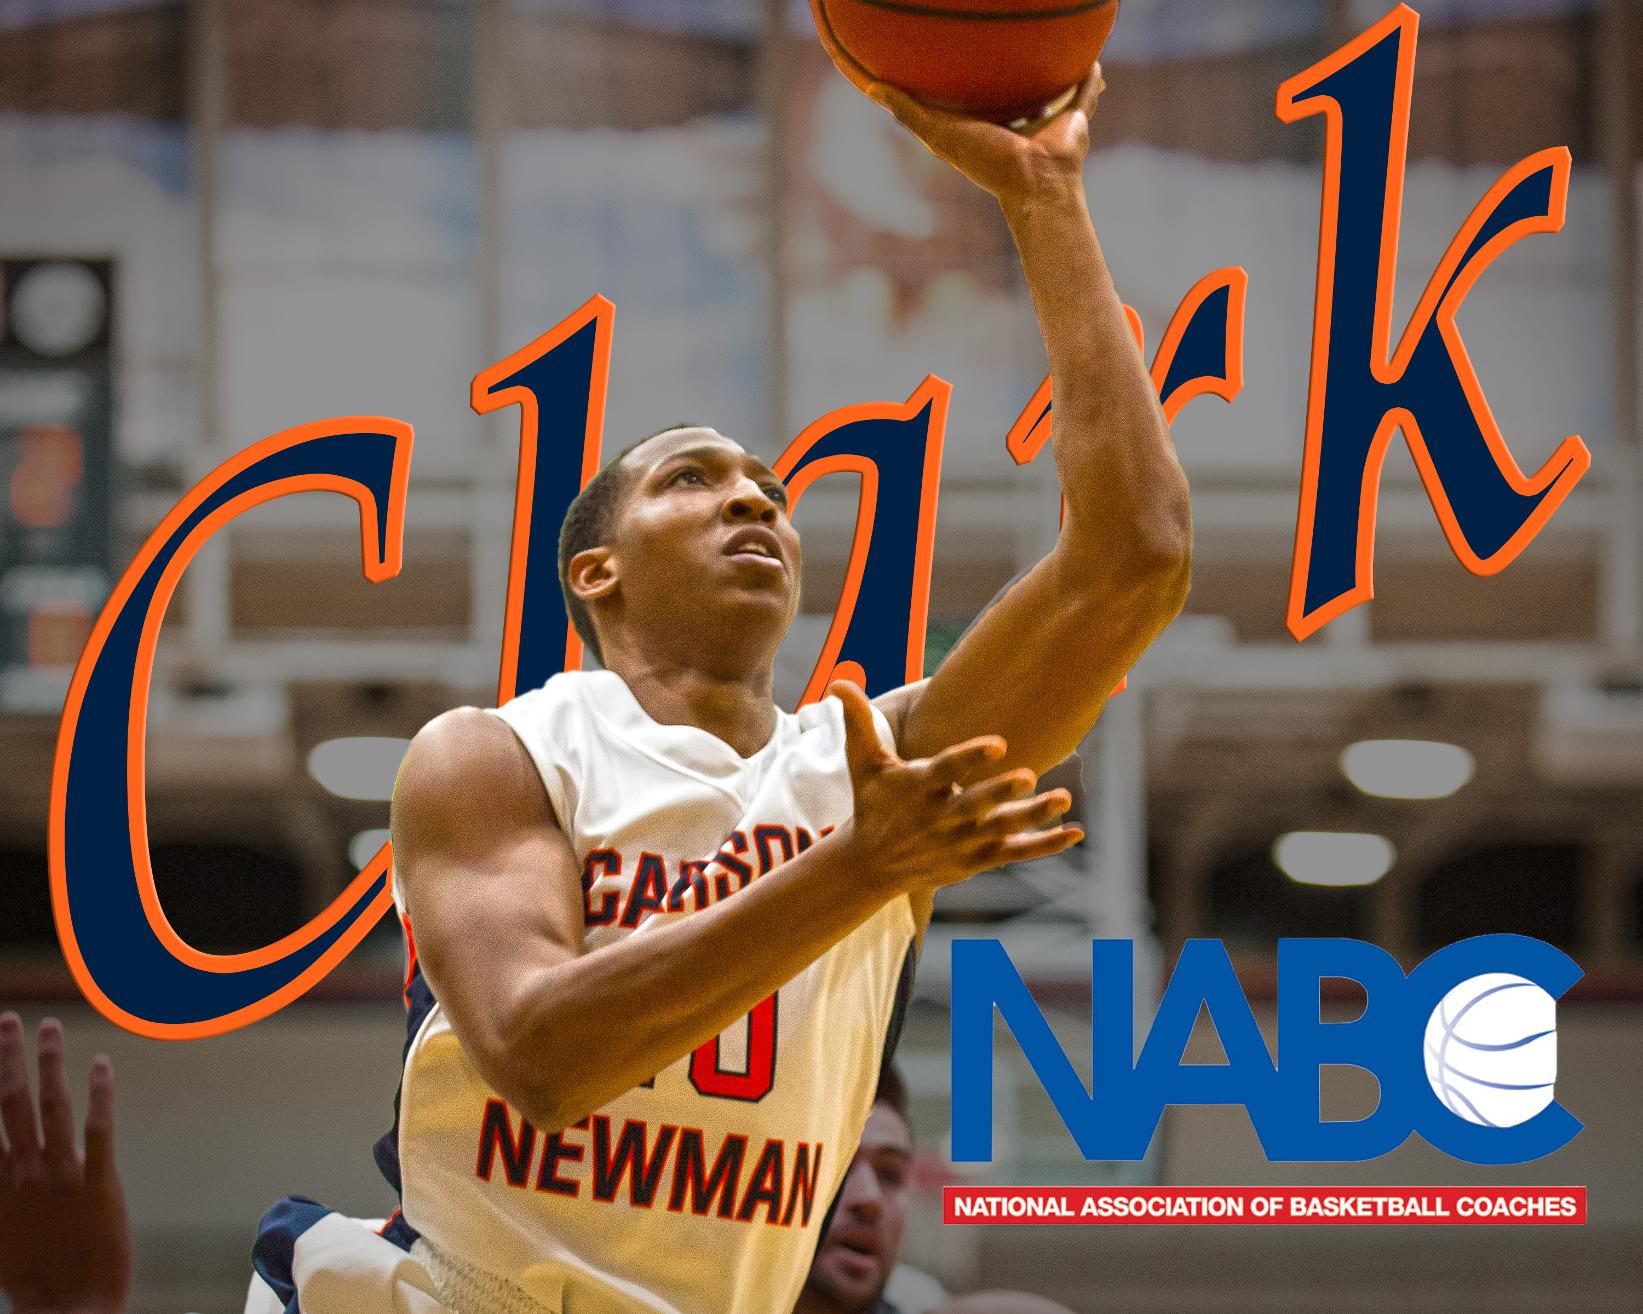 Clark tabbed first team All-Region by NABC